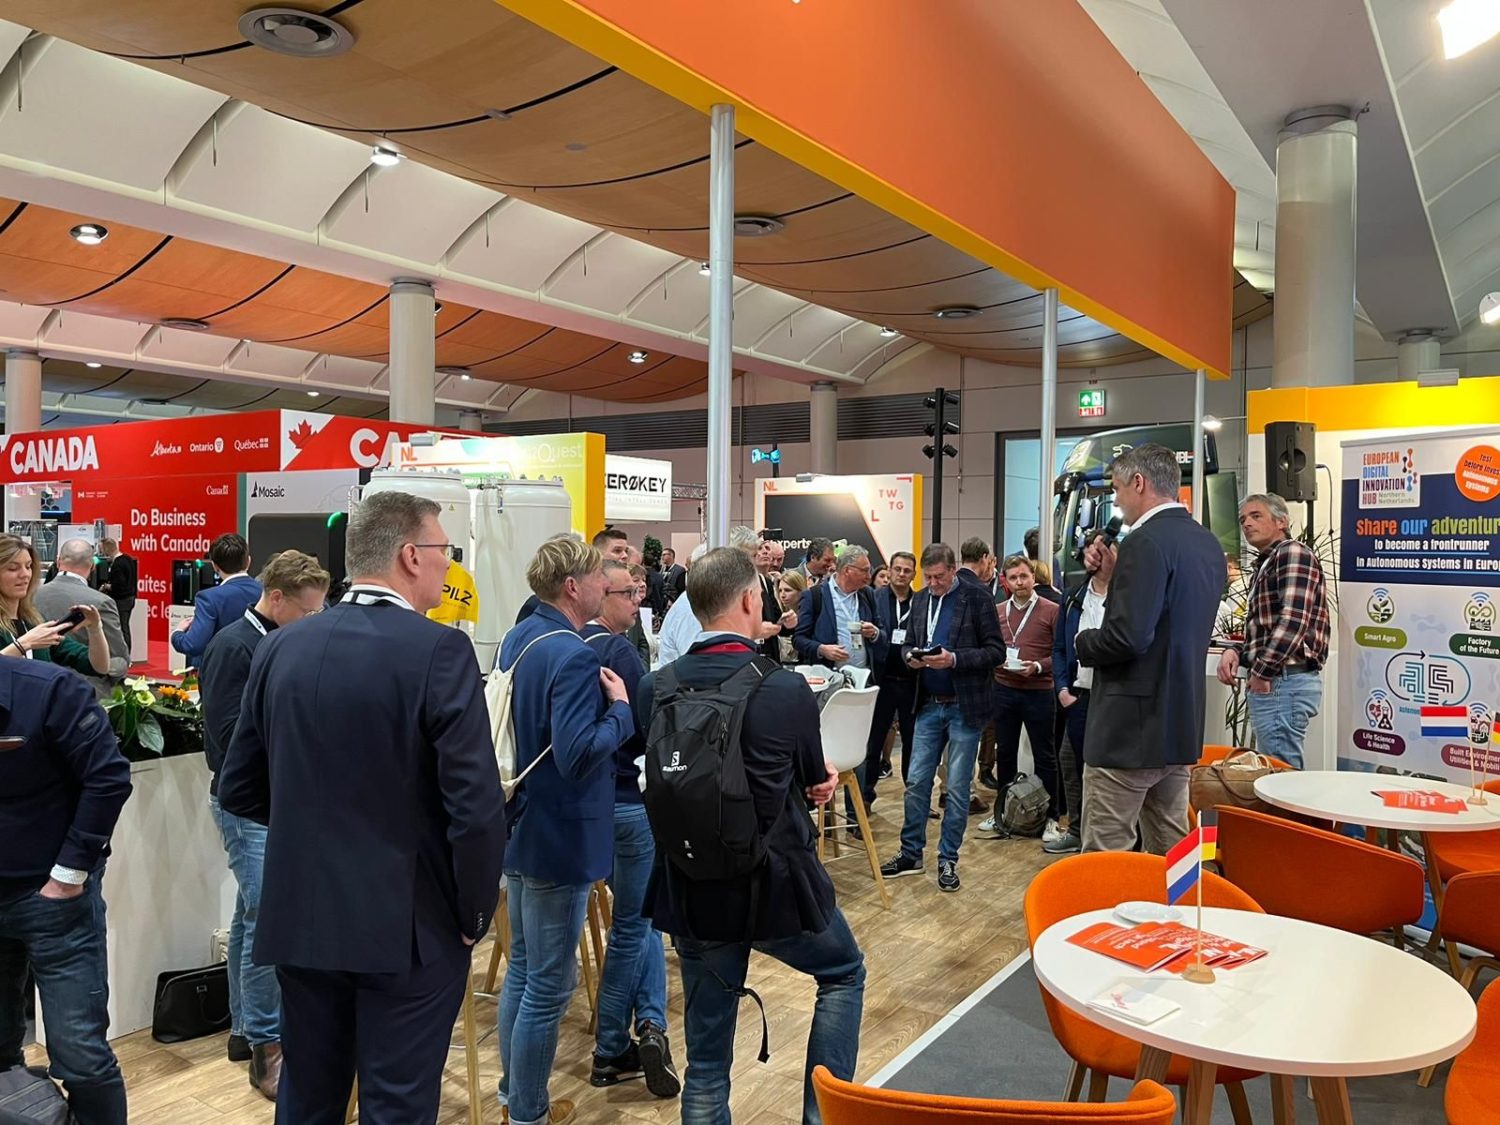 Hannover Messe: overwhelming in scope and developments shown